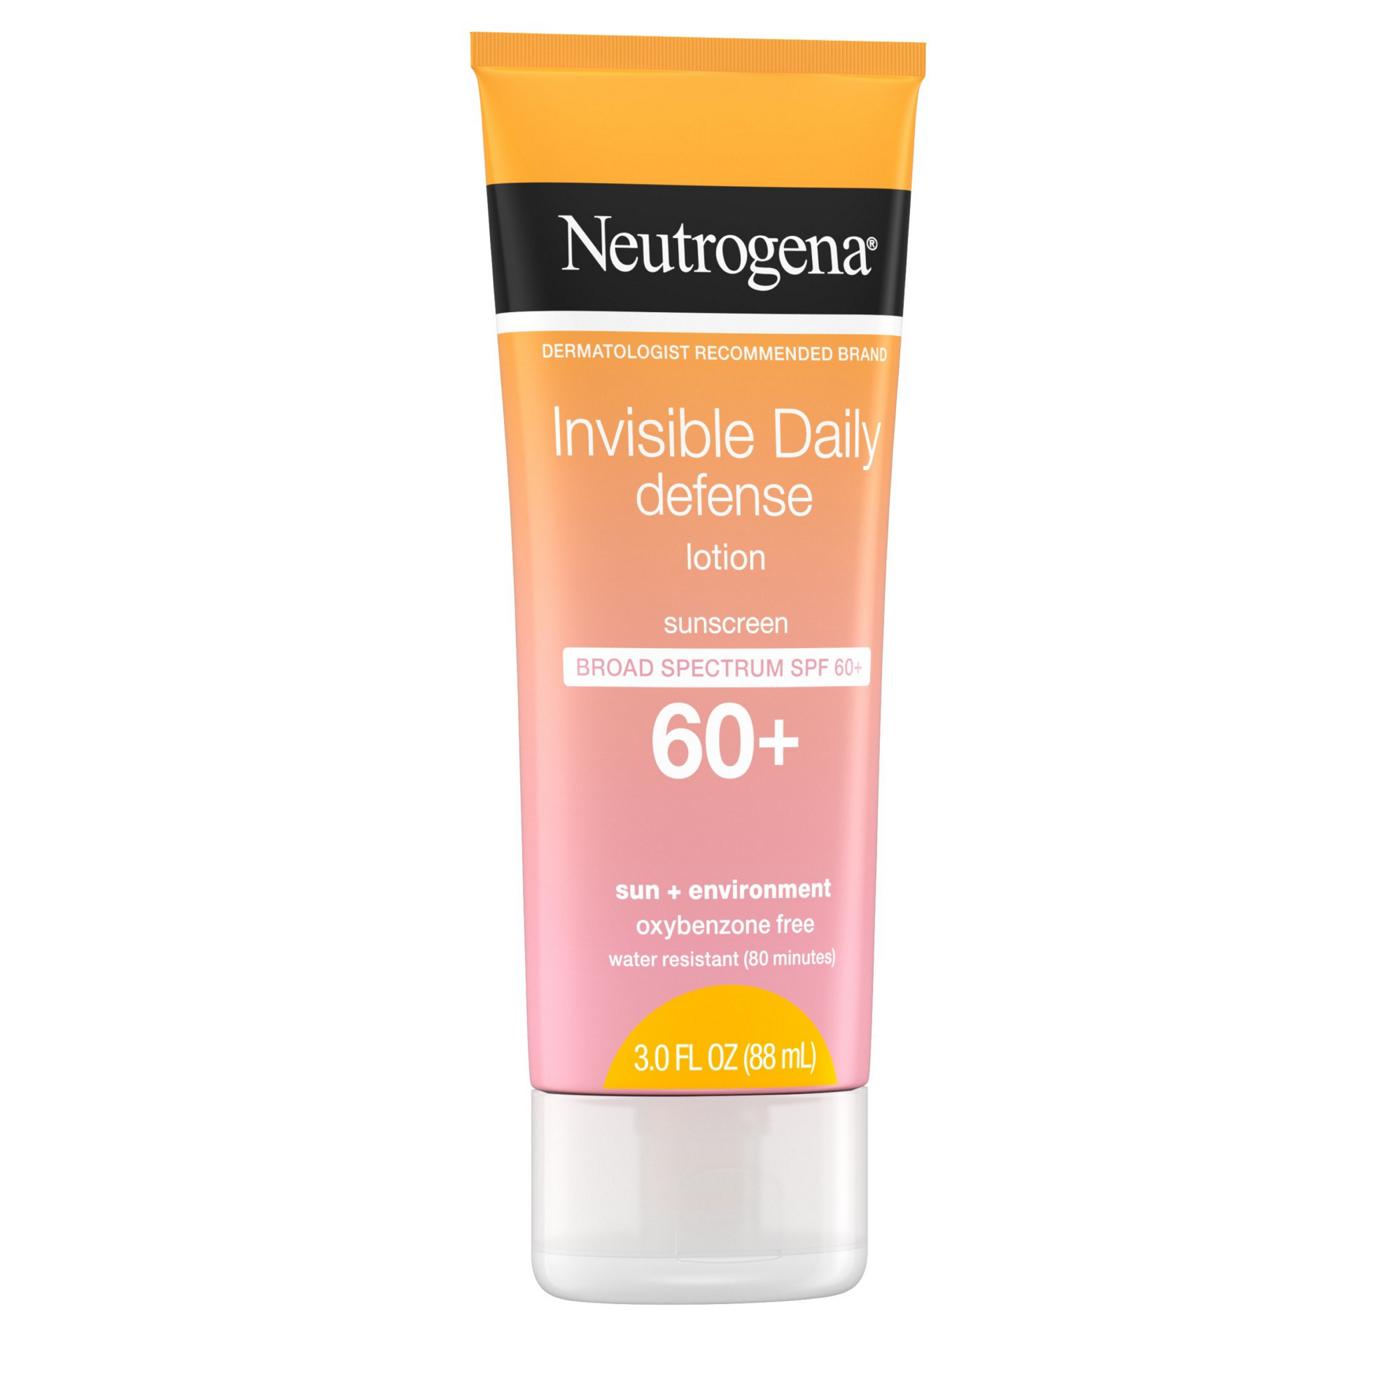 Neutrogena Invisible Daily Defense Sunscreen Lotion - SPF 60+; image 5 of 6